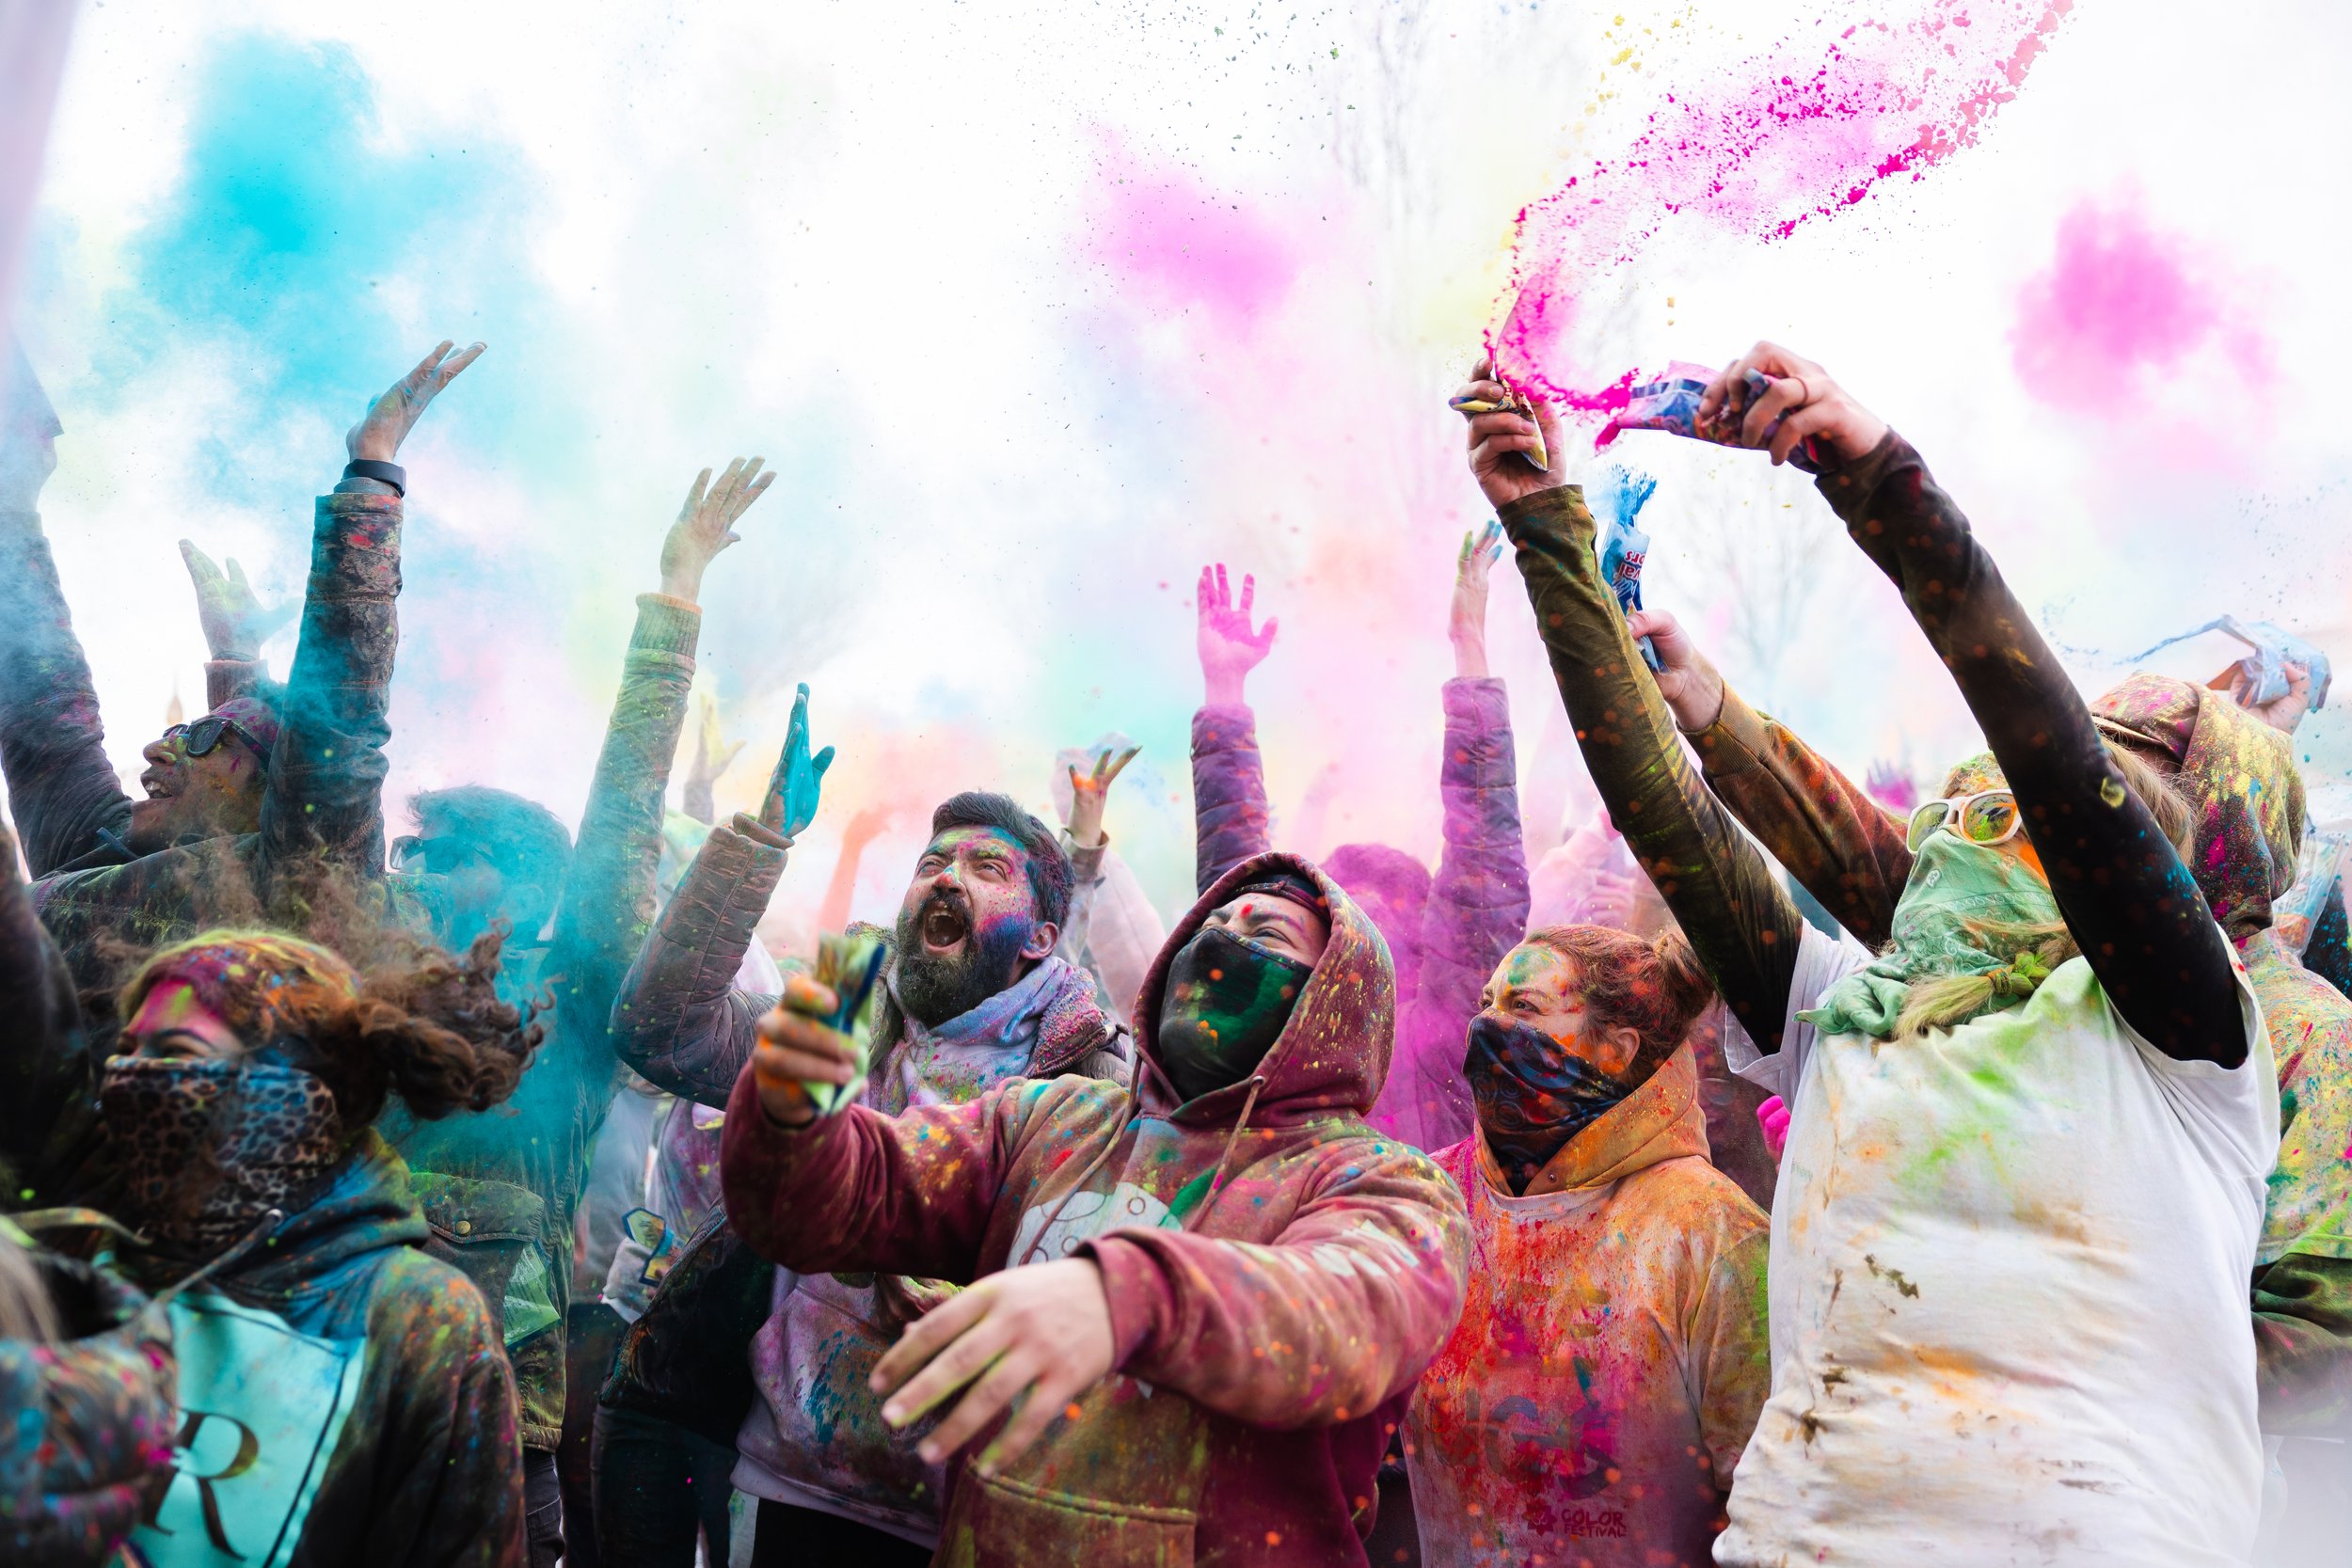  Attendees cheer and throw colored powder in the air during the Holi Festival of Color at the Krishna Temple in Spanish Fork on March 26, 2023.  